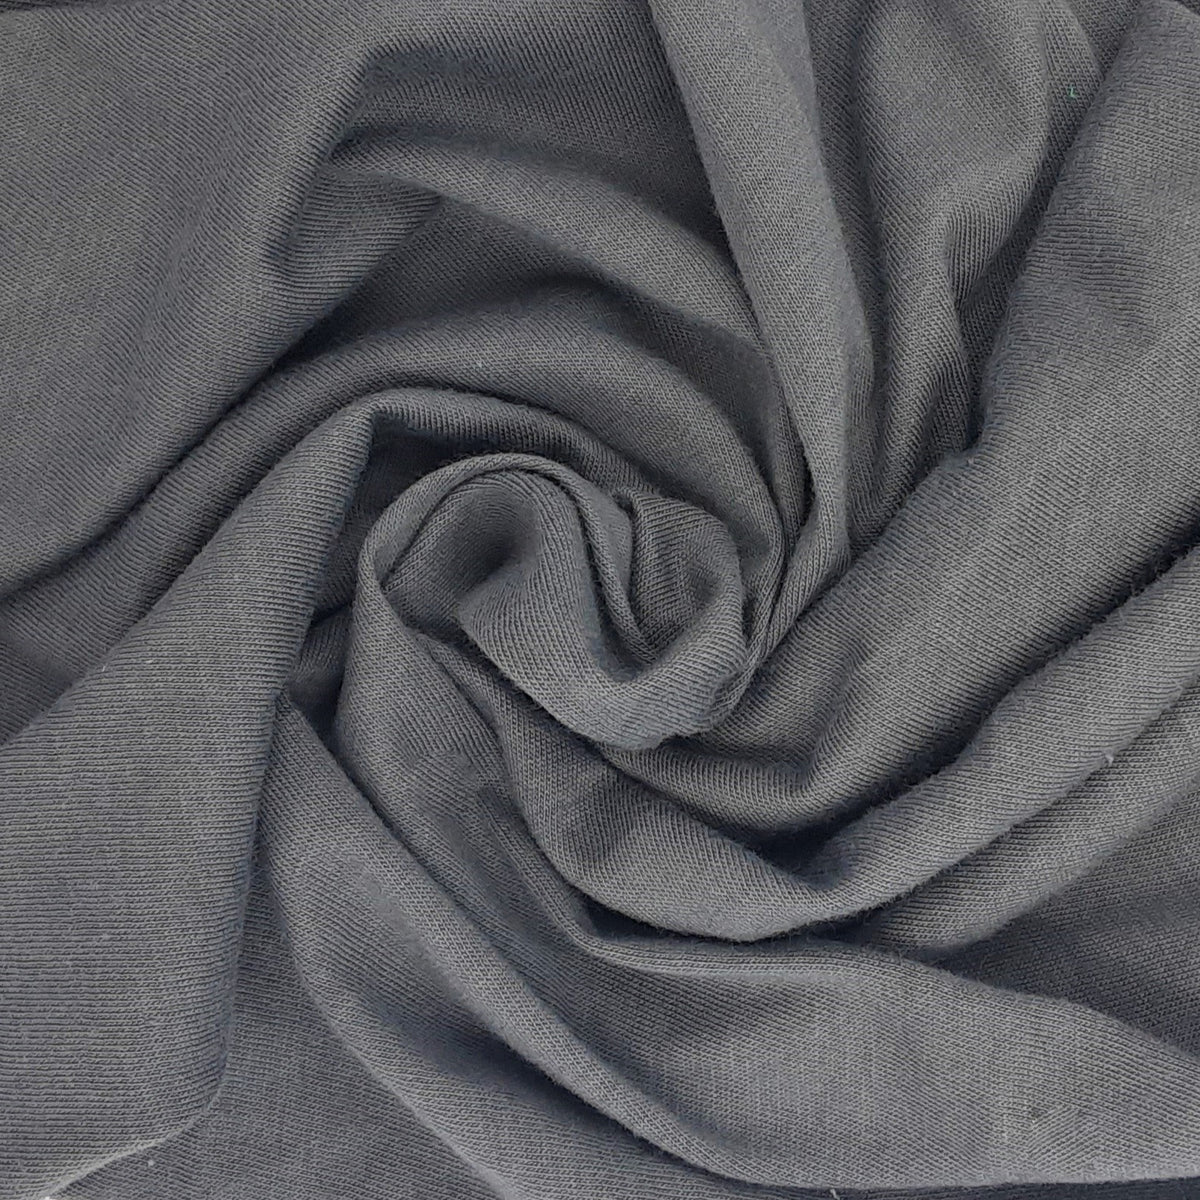 Charcoal Grey Cotton Jersey Fabric  Buy Online Now – Sew Me Something